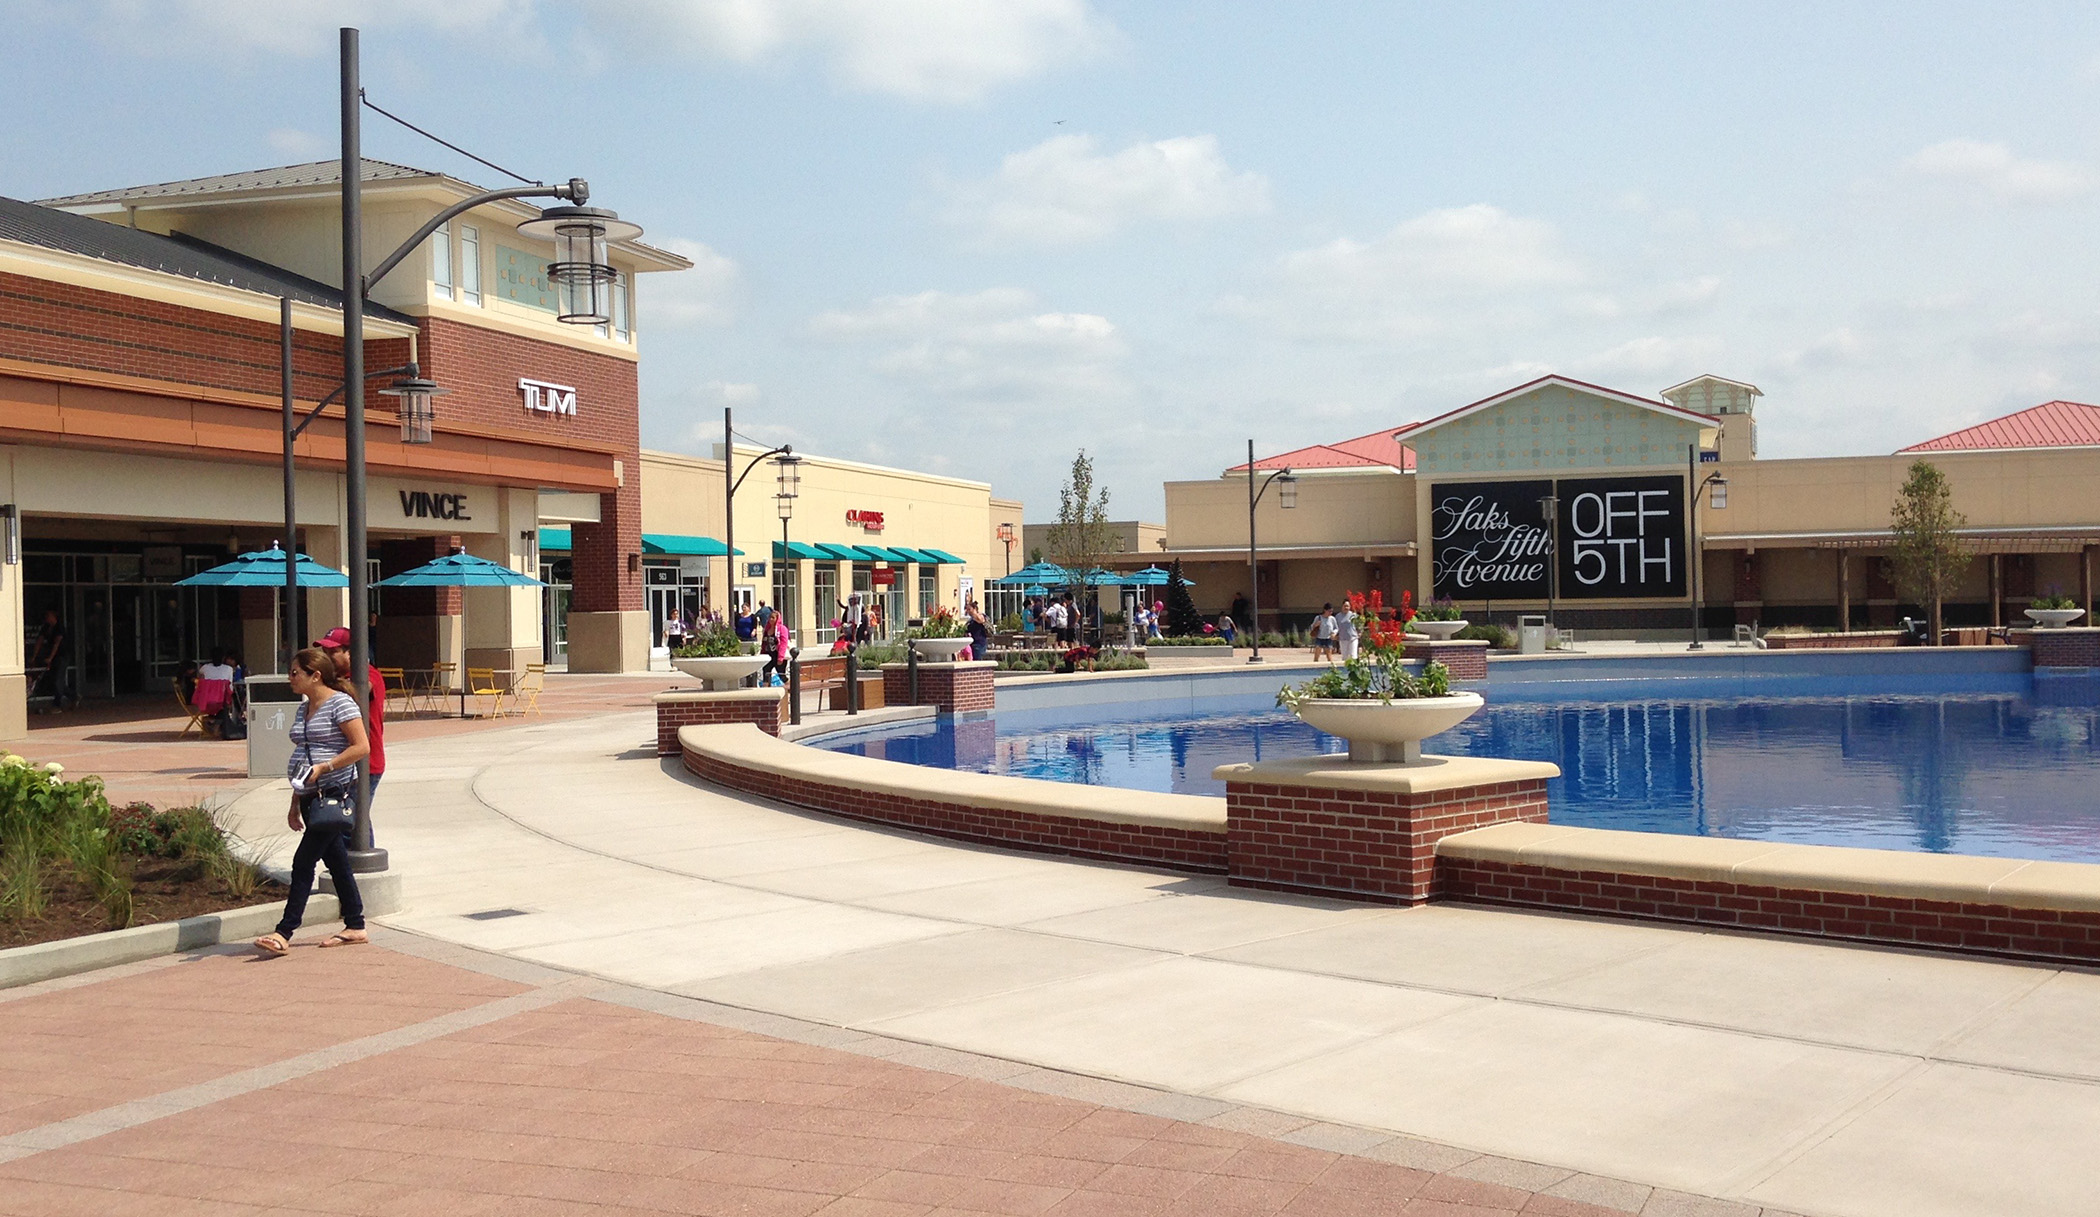 saks-among-top-new-attractions-at-chicago-premium-outlets